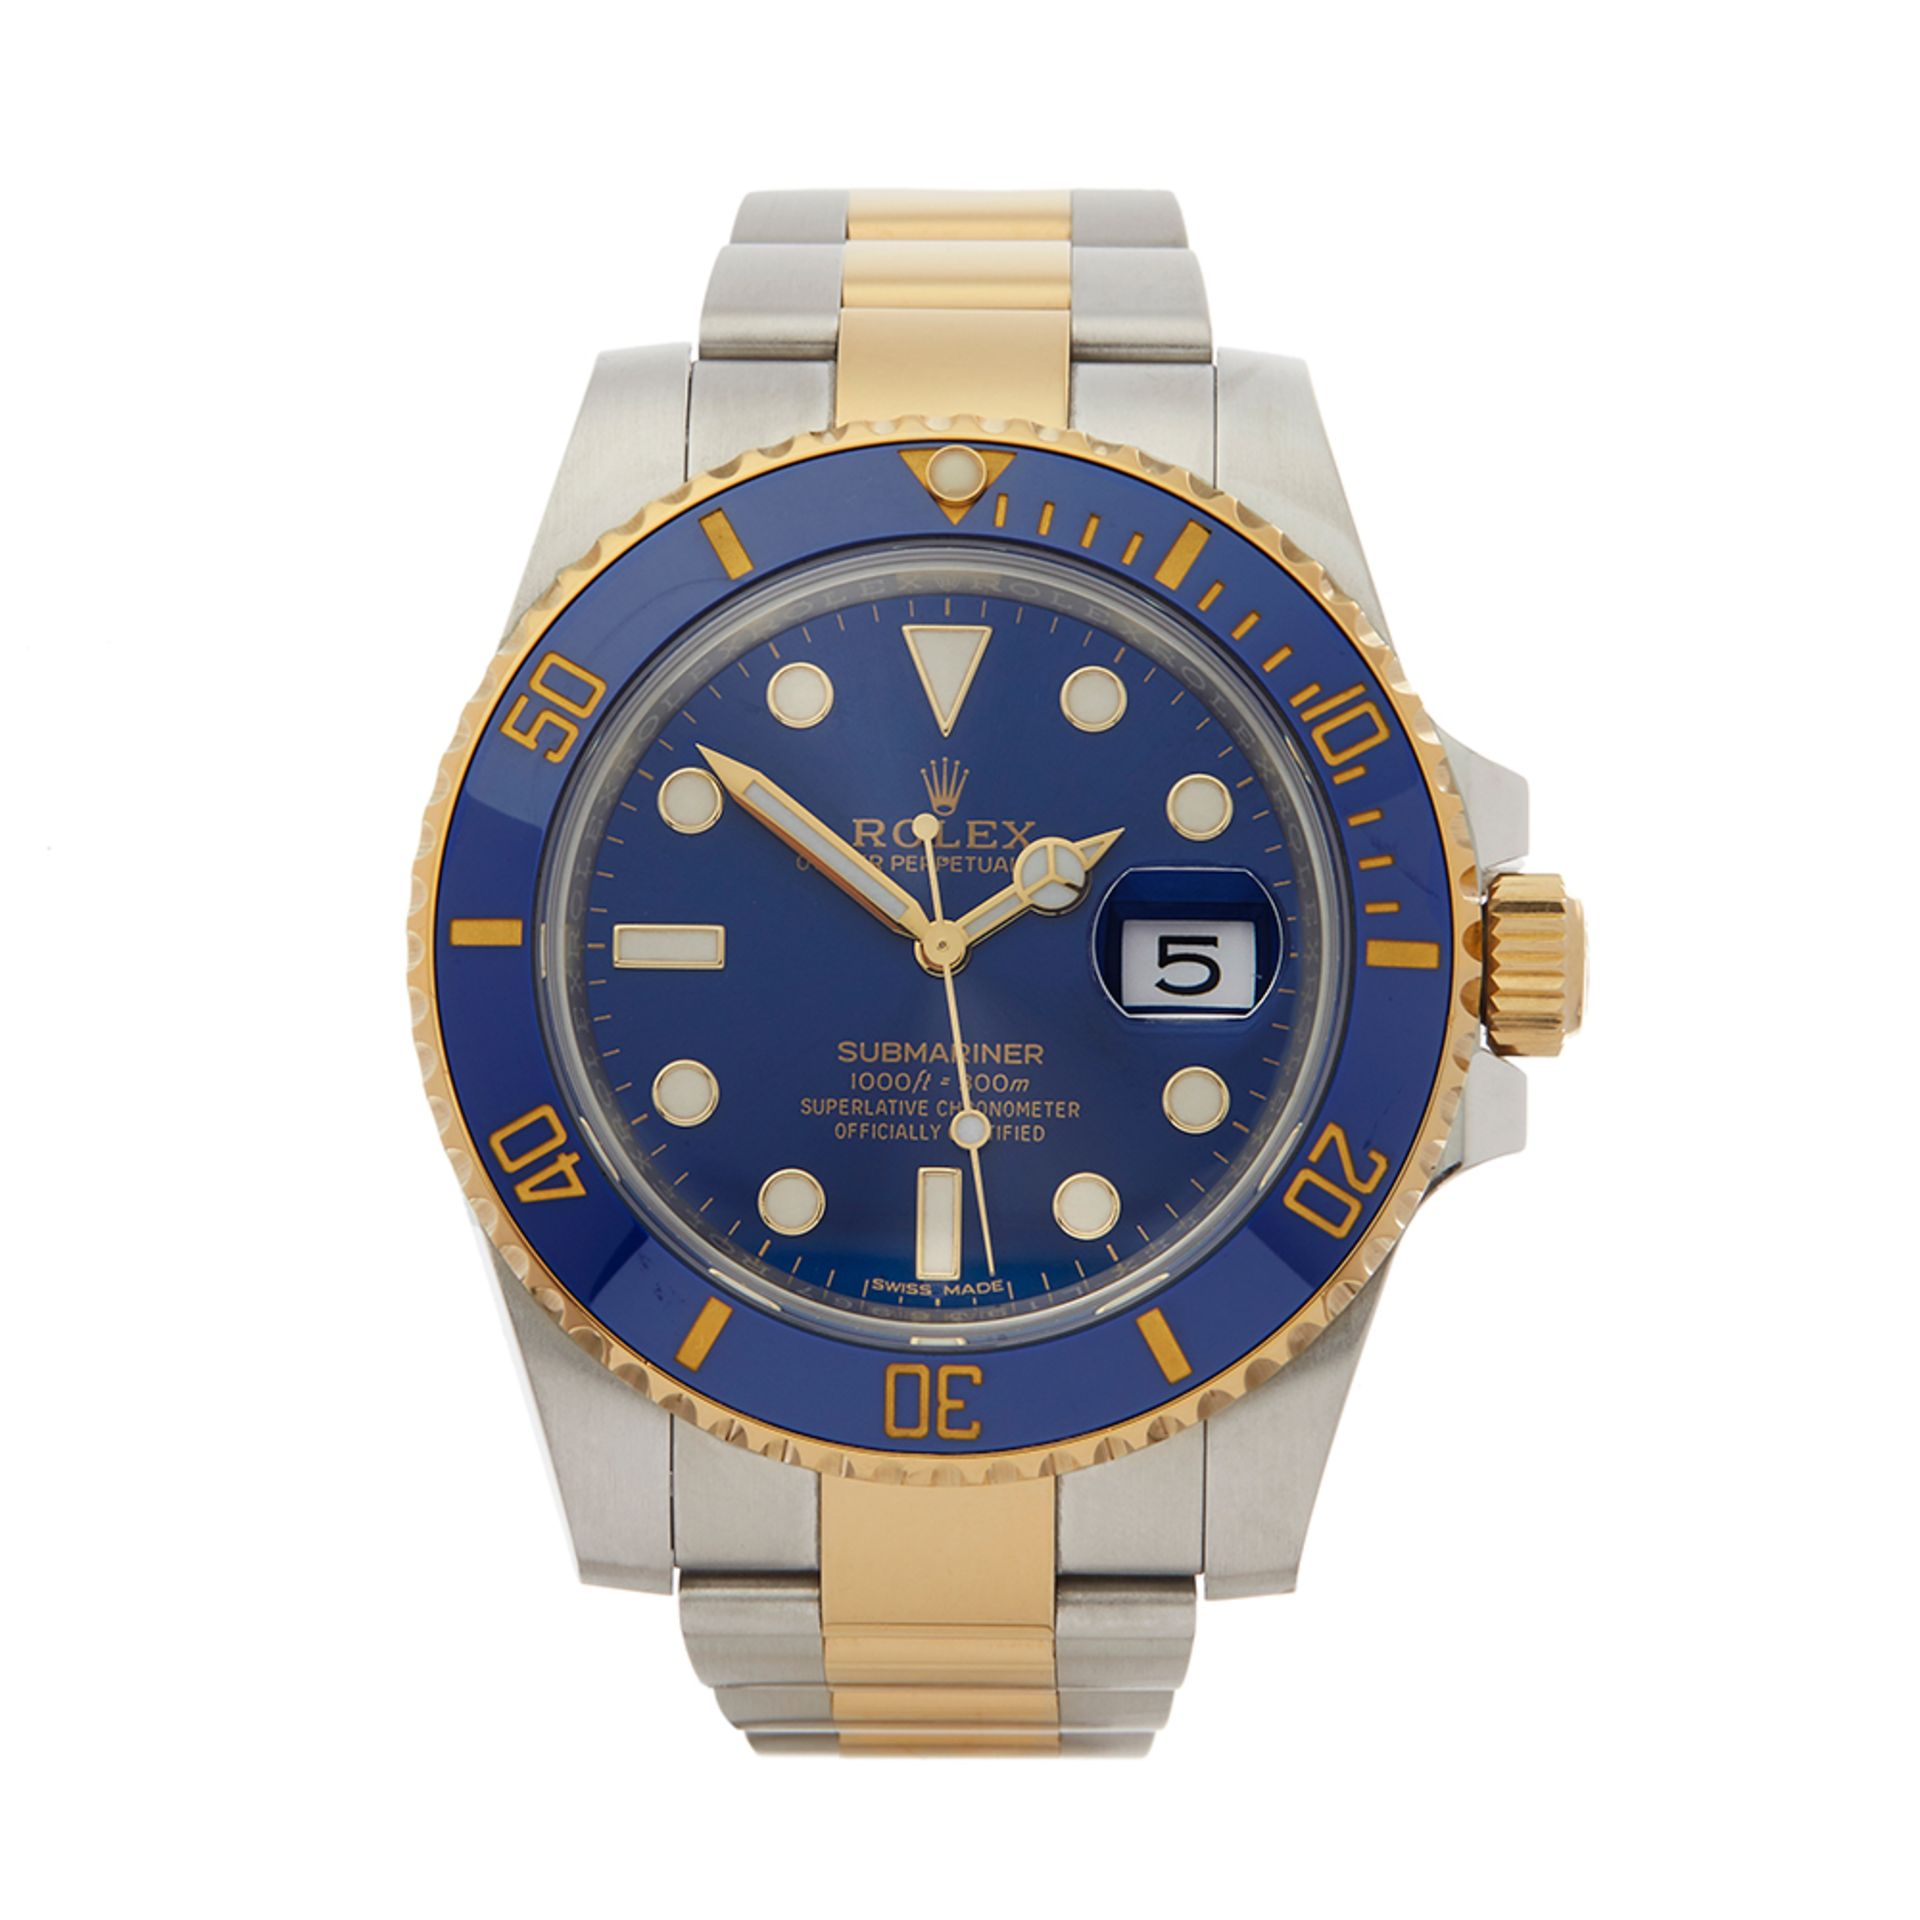 Submariner Stainless Steel & 18K Yellow Gold - 116613LB - Image 2 of 8